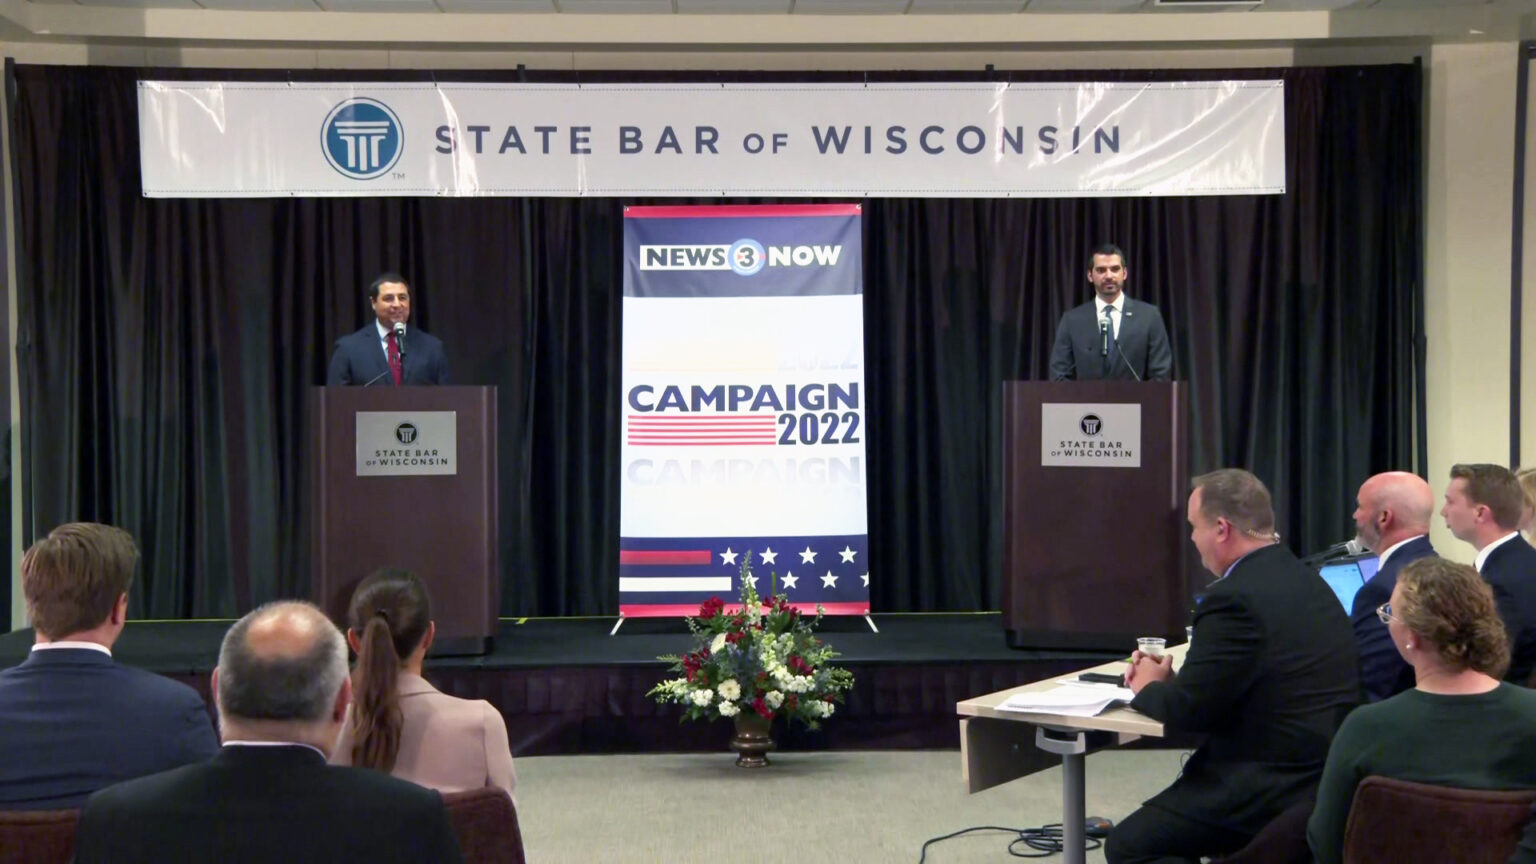 Josh Kaul and Eric Toney stand behind podiums and in front of a curtain on a low stage, with a banner above reading State Bar of Wisconsin and a display between them reading News3Now and Campaign 2022, with three people seated at a table facing stage left and other audience members seated in chairs.